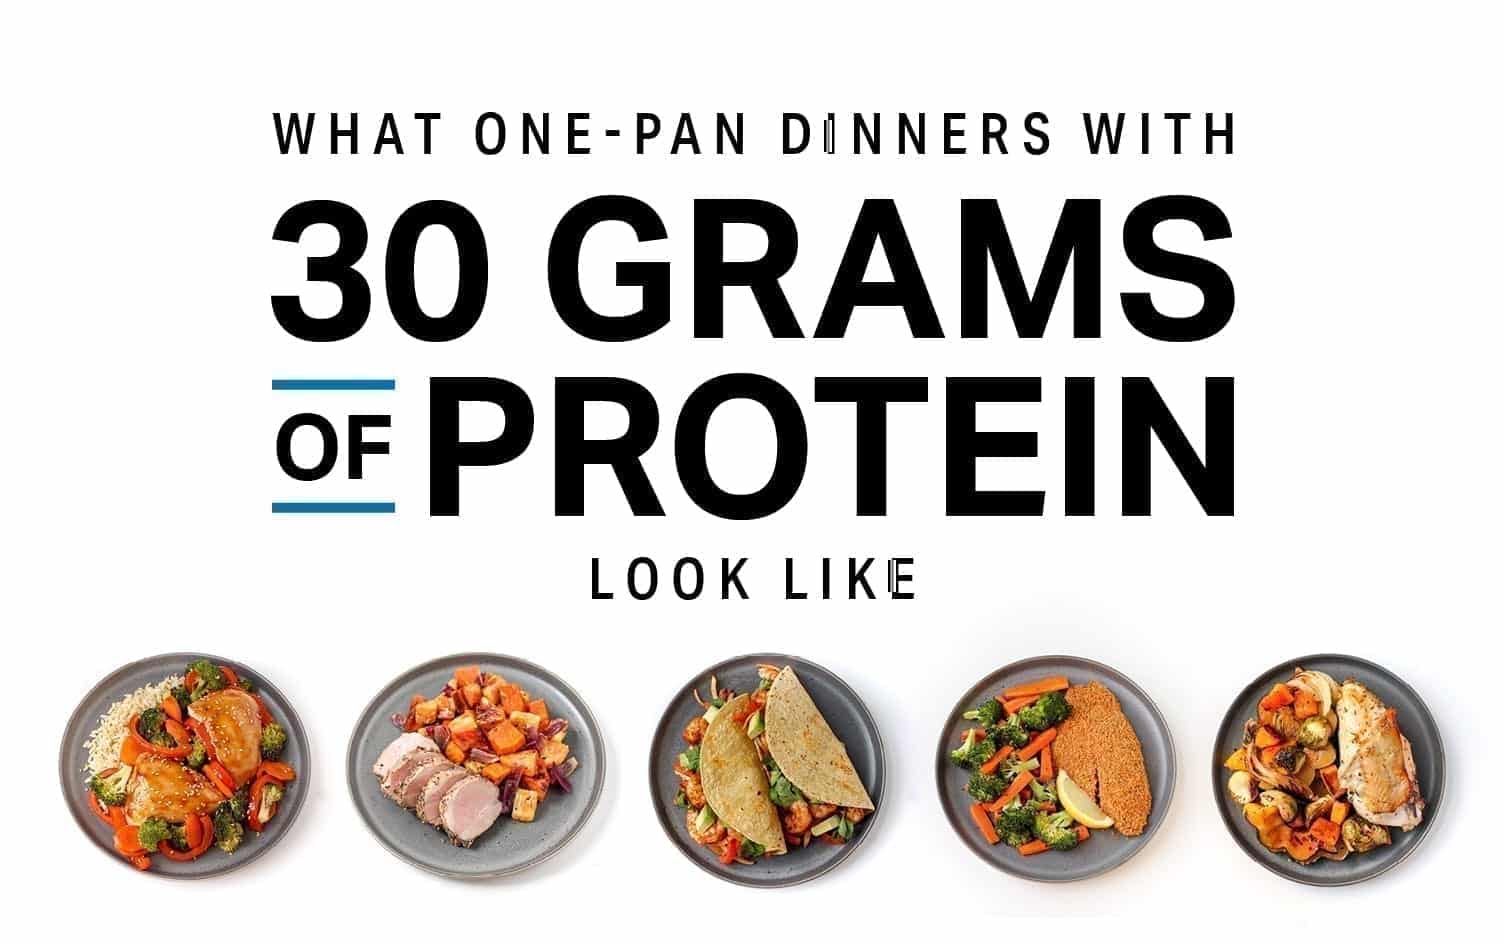 Here's What 30 Grams of Protein Looks Like